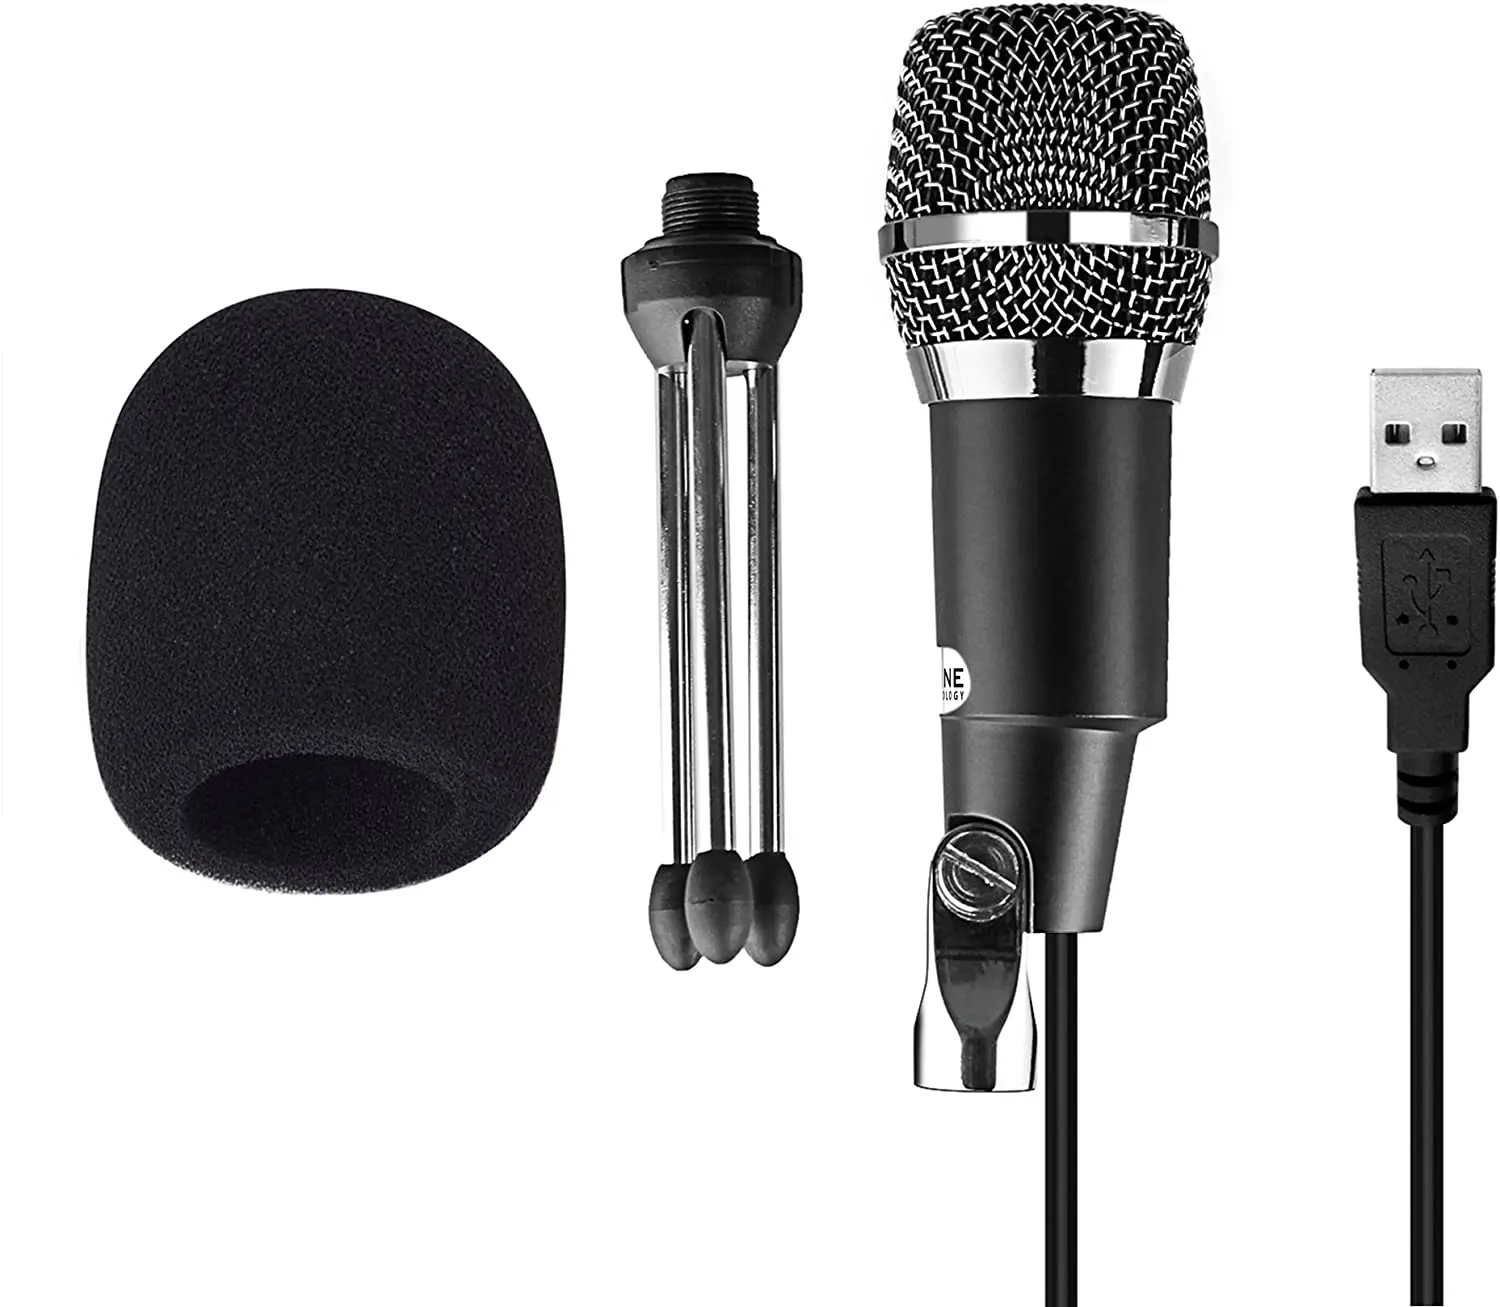 USB Microphone, FIFINE Plug and Play Home Studio USB Condenser Microphone for Skype, Recordings for YouTube, Google Voice enlarge